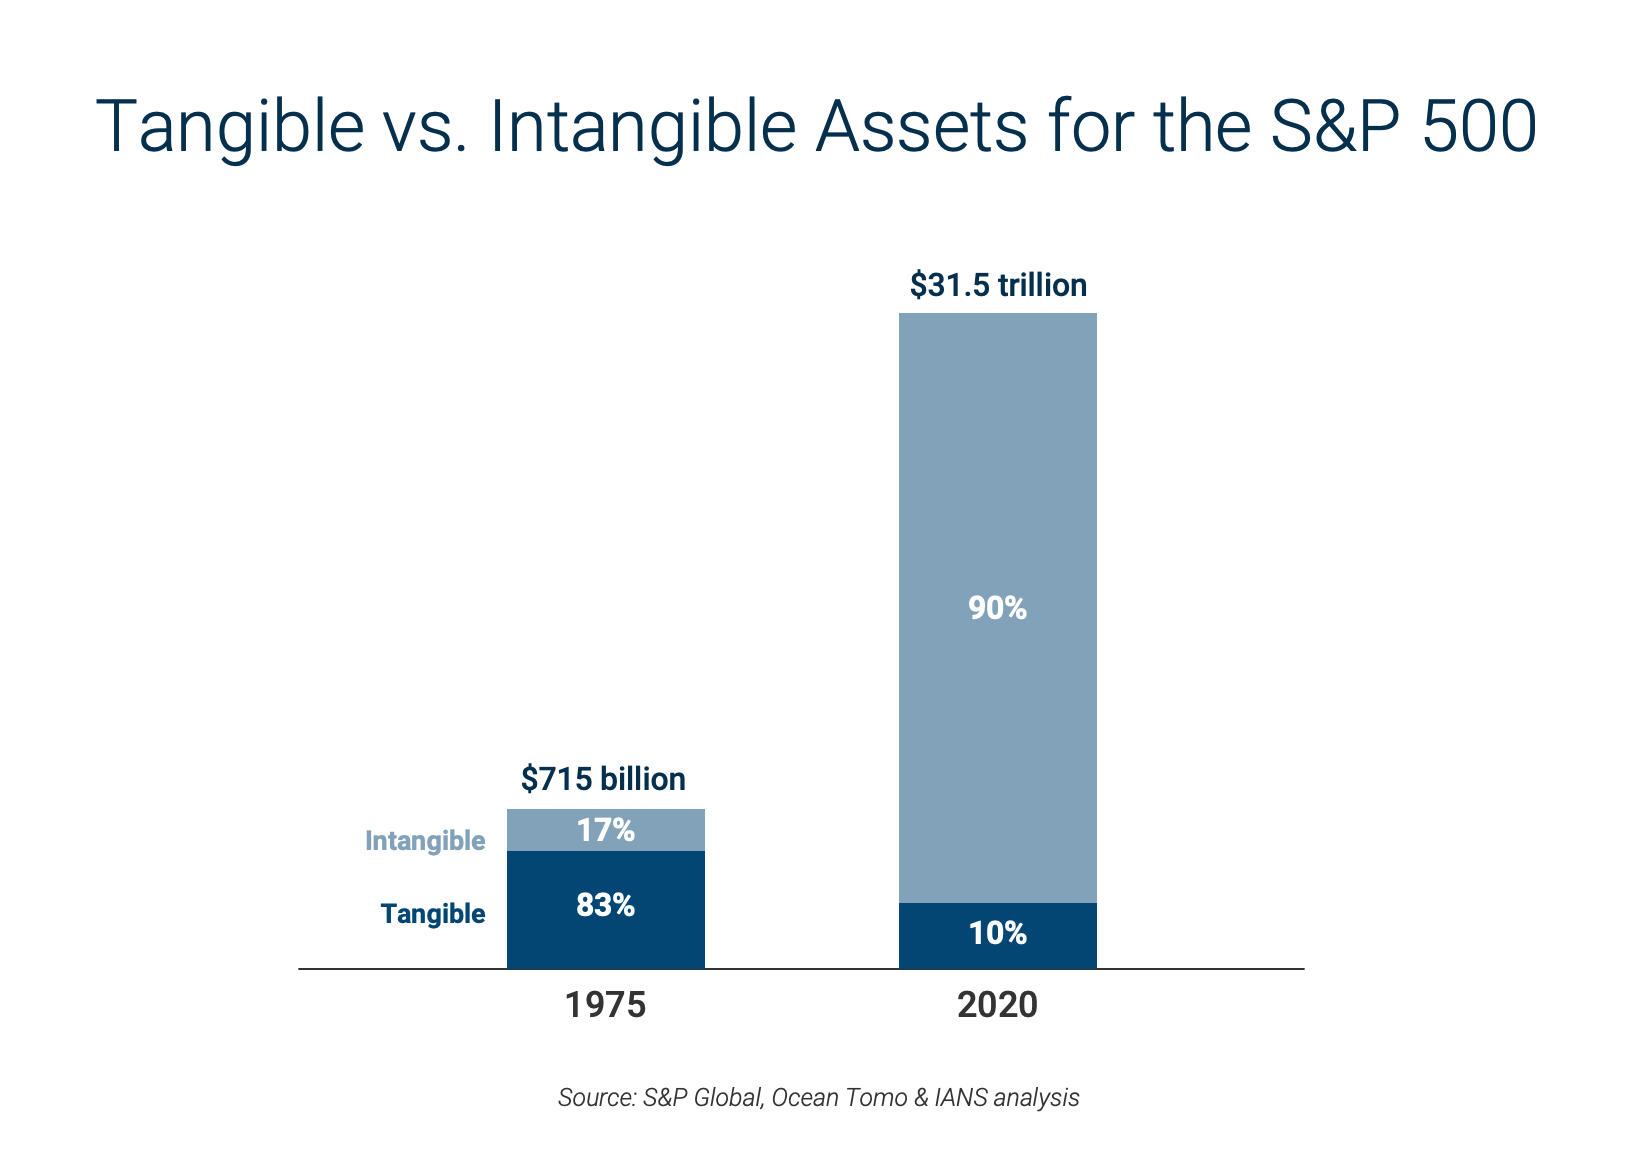 Chart Representing Tangible vs Intangible Assets for the S&P 500